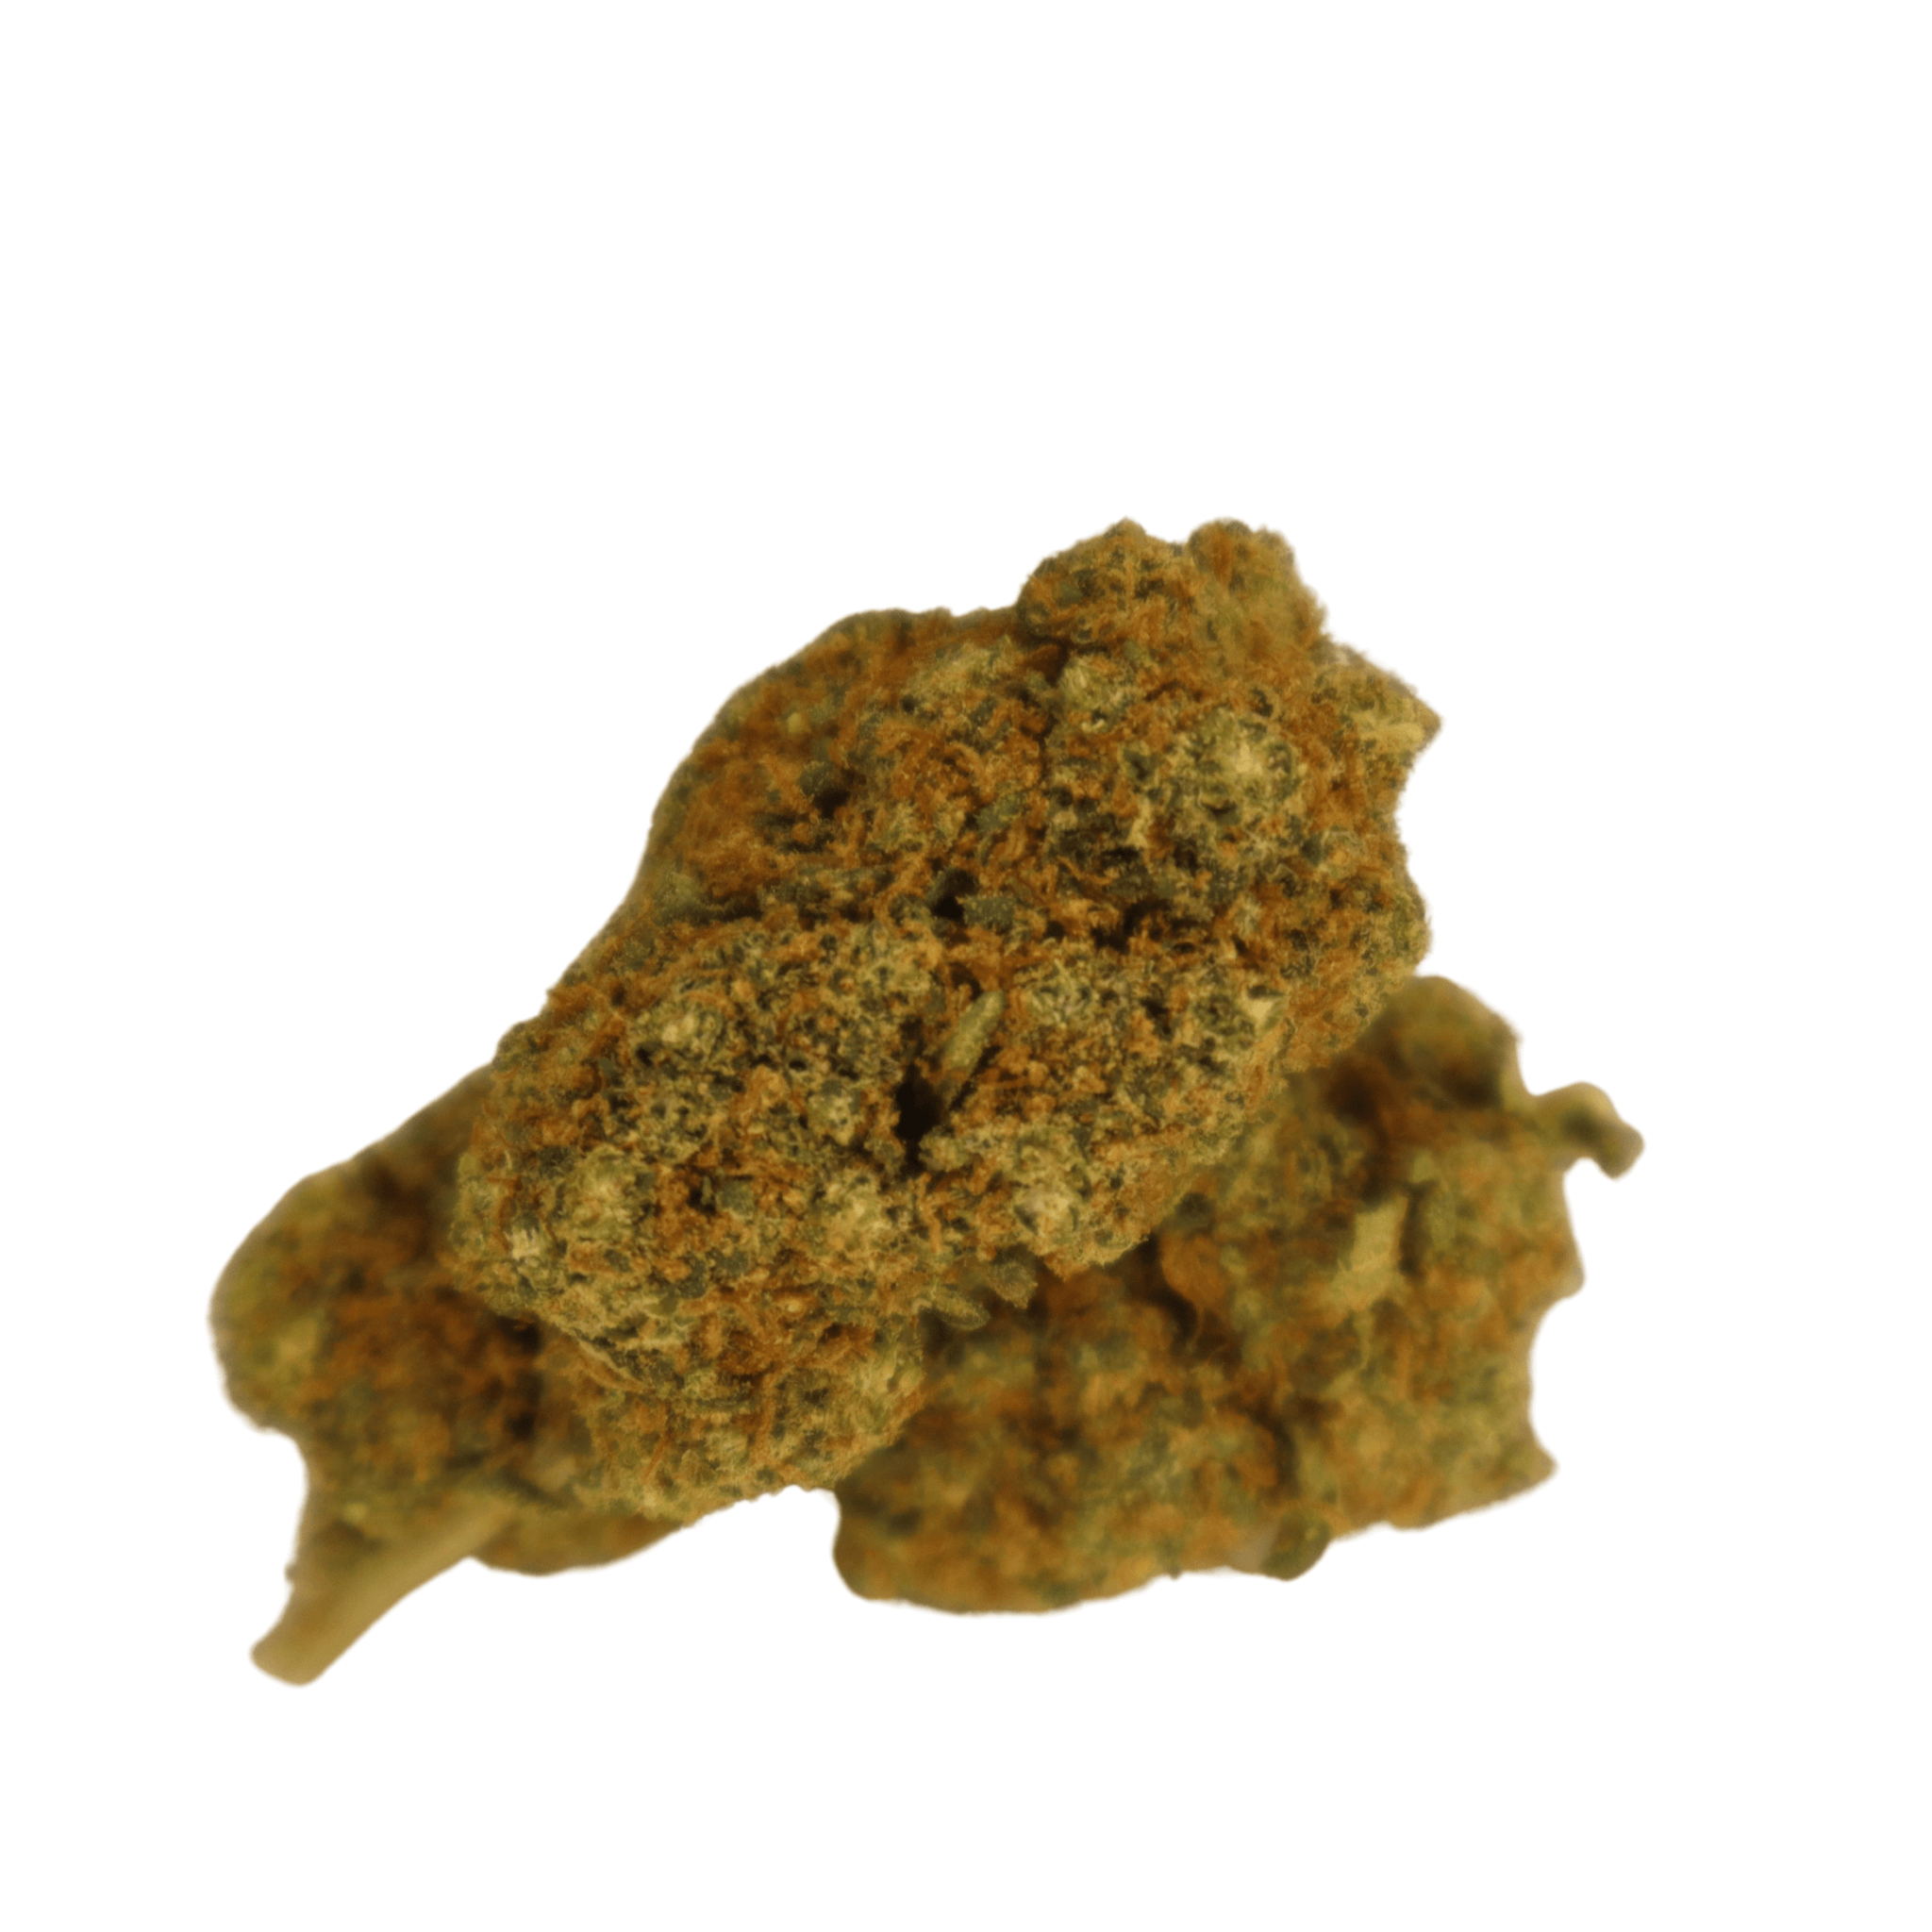 We Have 4 New Amazing Cannabis Strains For You To Try